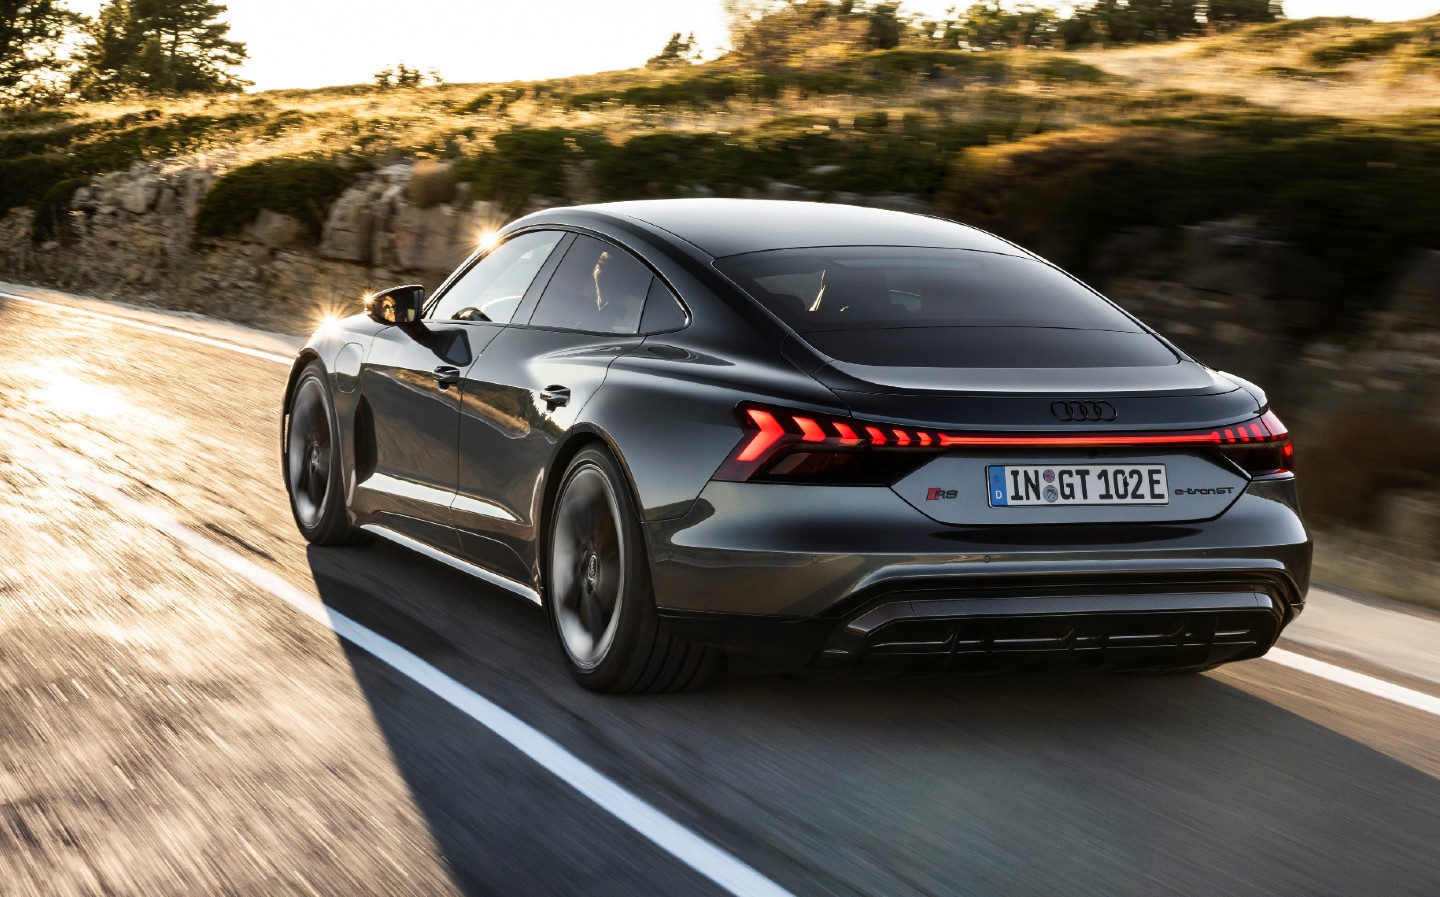 2021 Audi e-tron GT and RS e-tron GT revealed: specs, range, price, UK on sale date